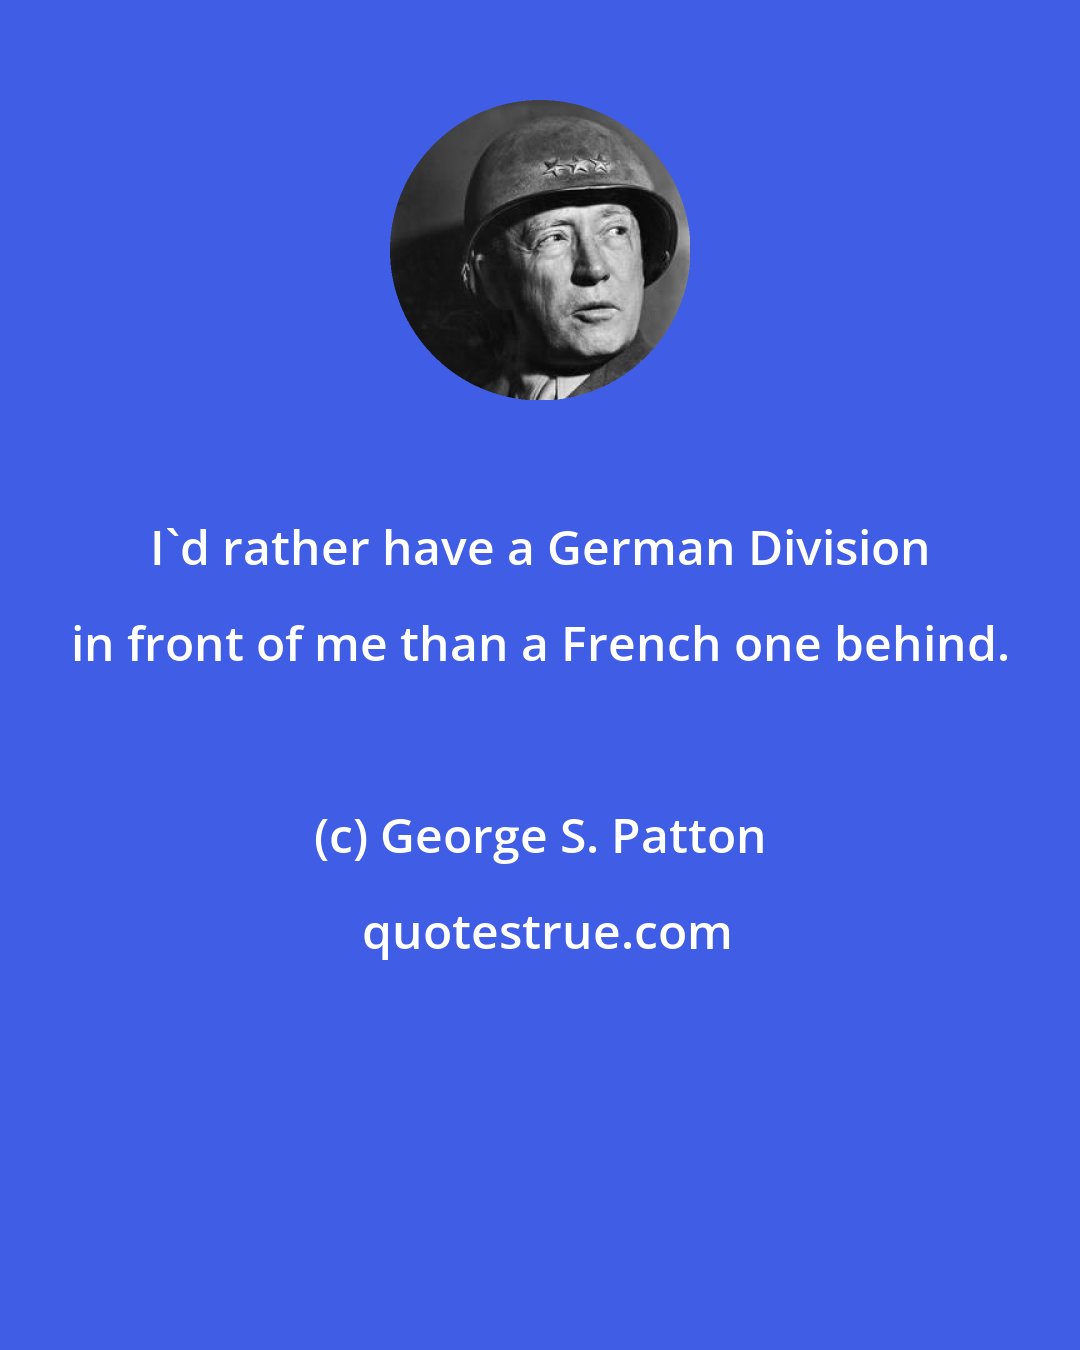 George S. Patton: I'd rather have a German Division in front of me than a French one behind.